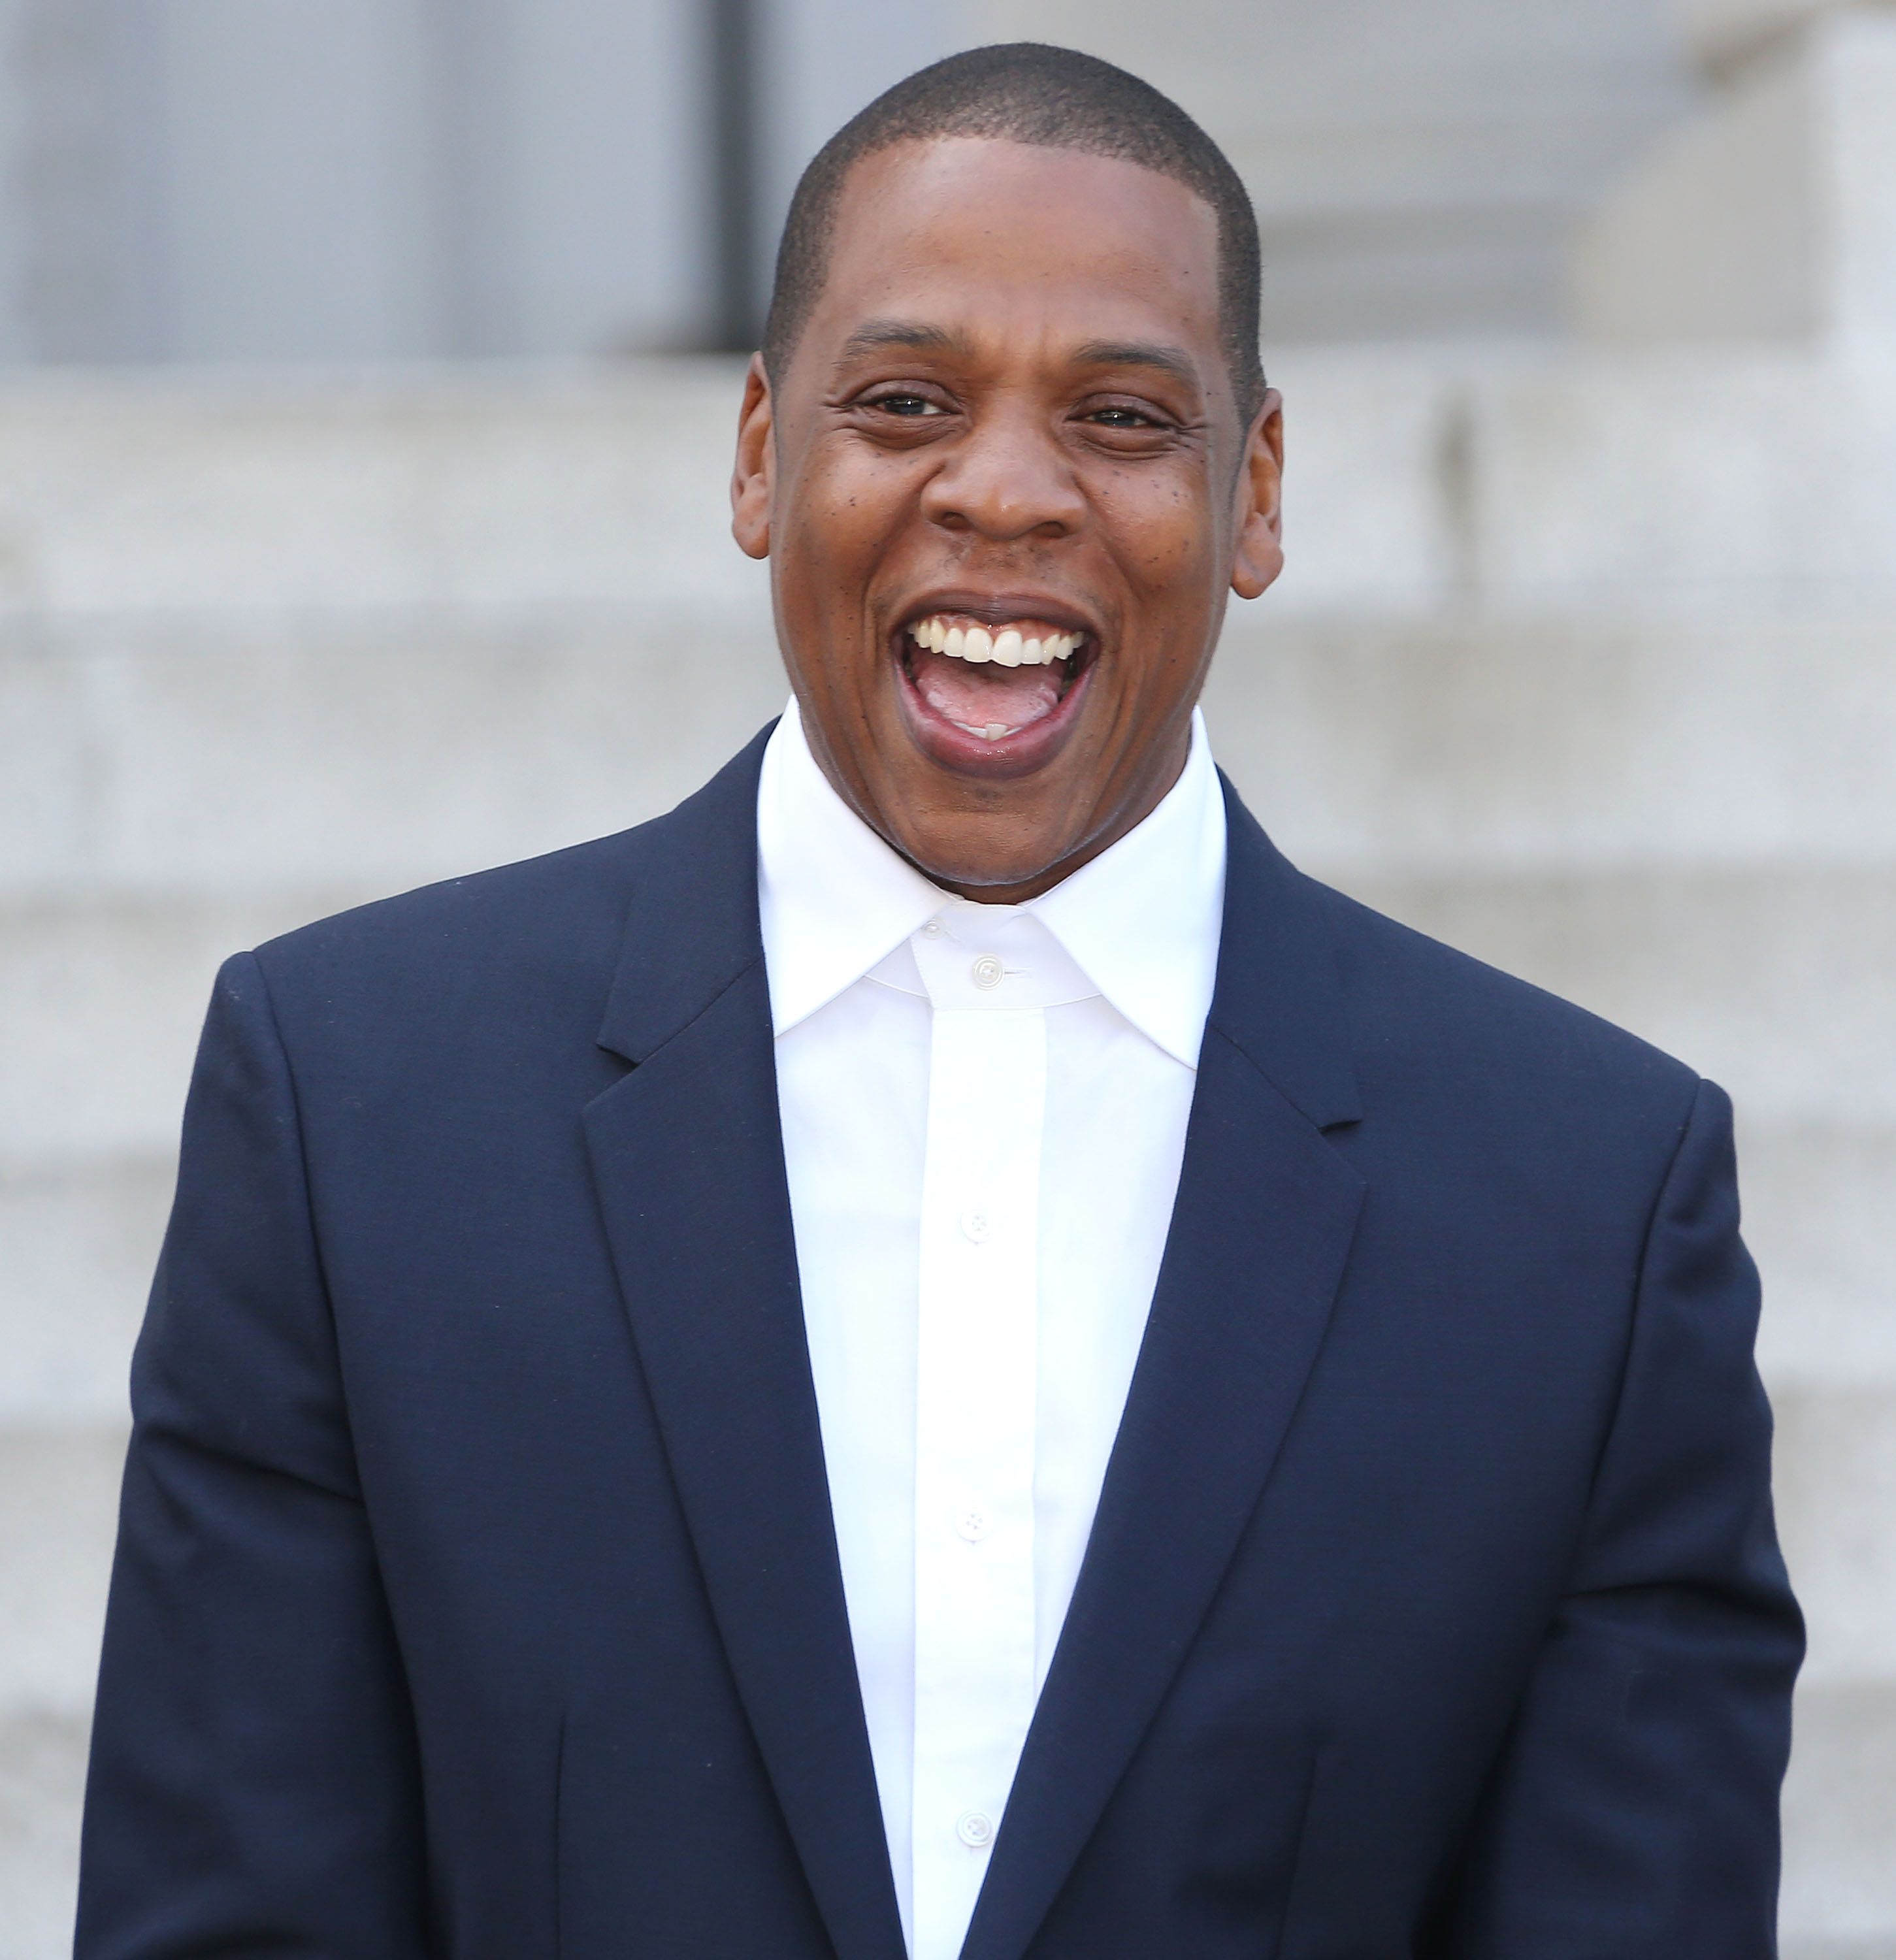 What Is Jay-Z's Net Worth? - What Is Jay-Z Worth Now?